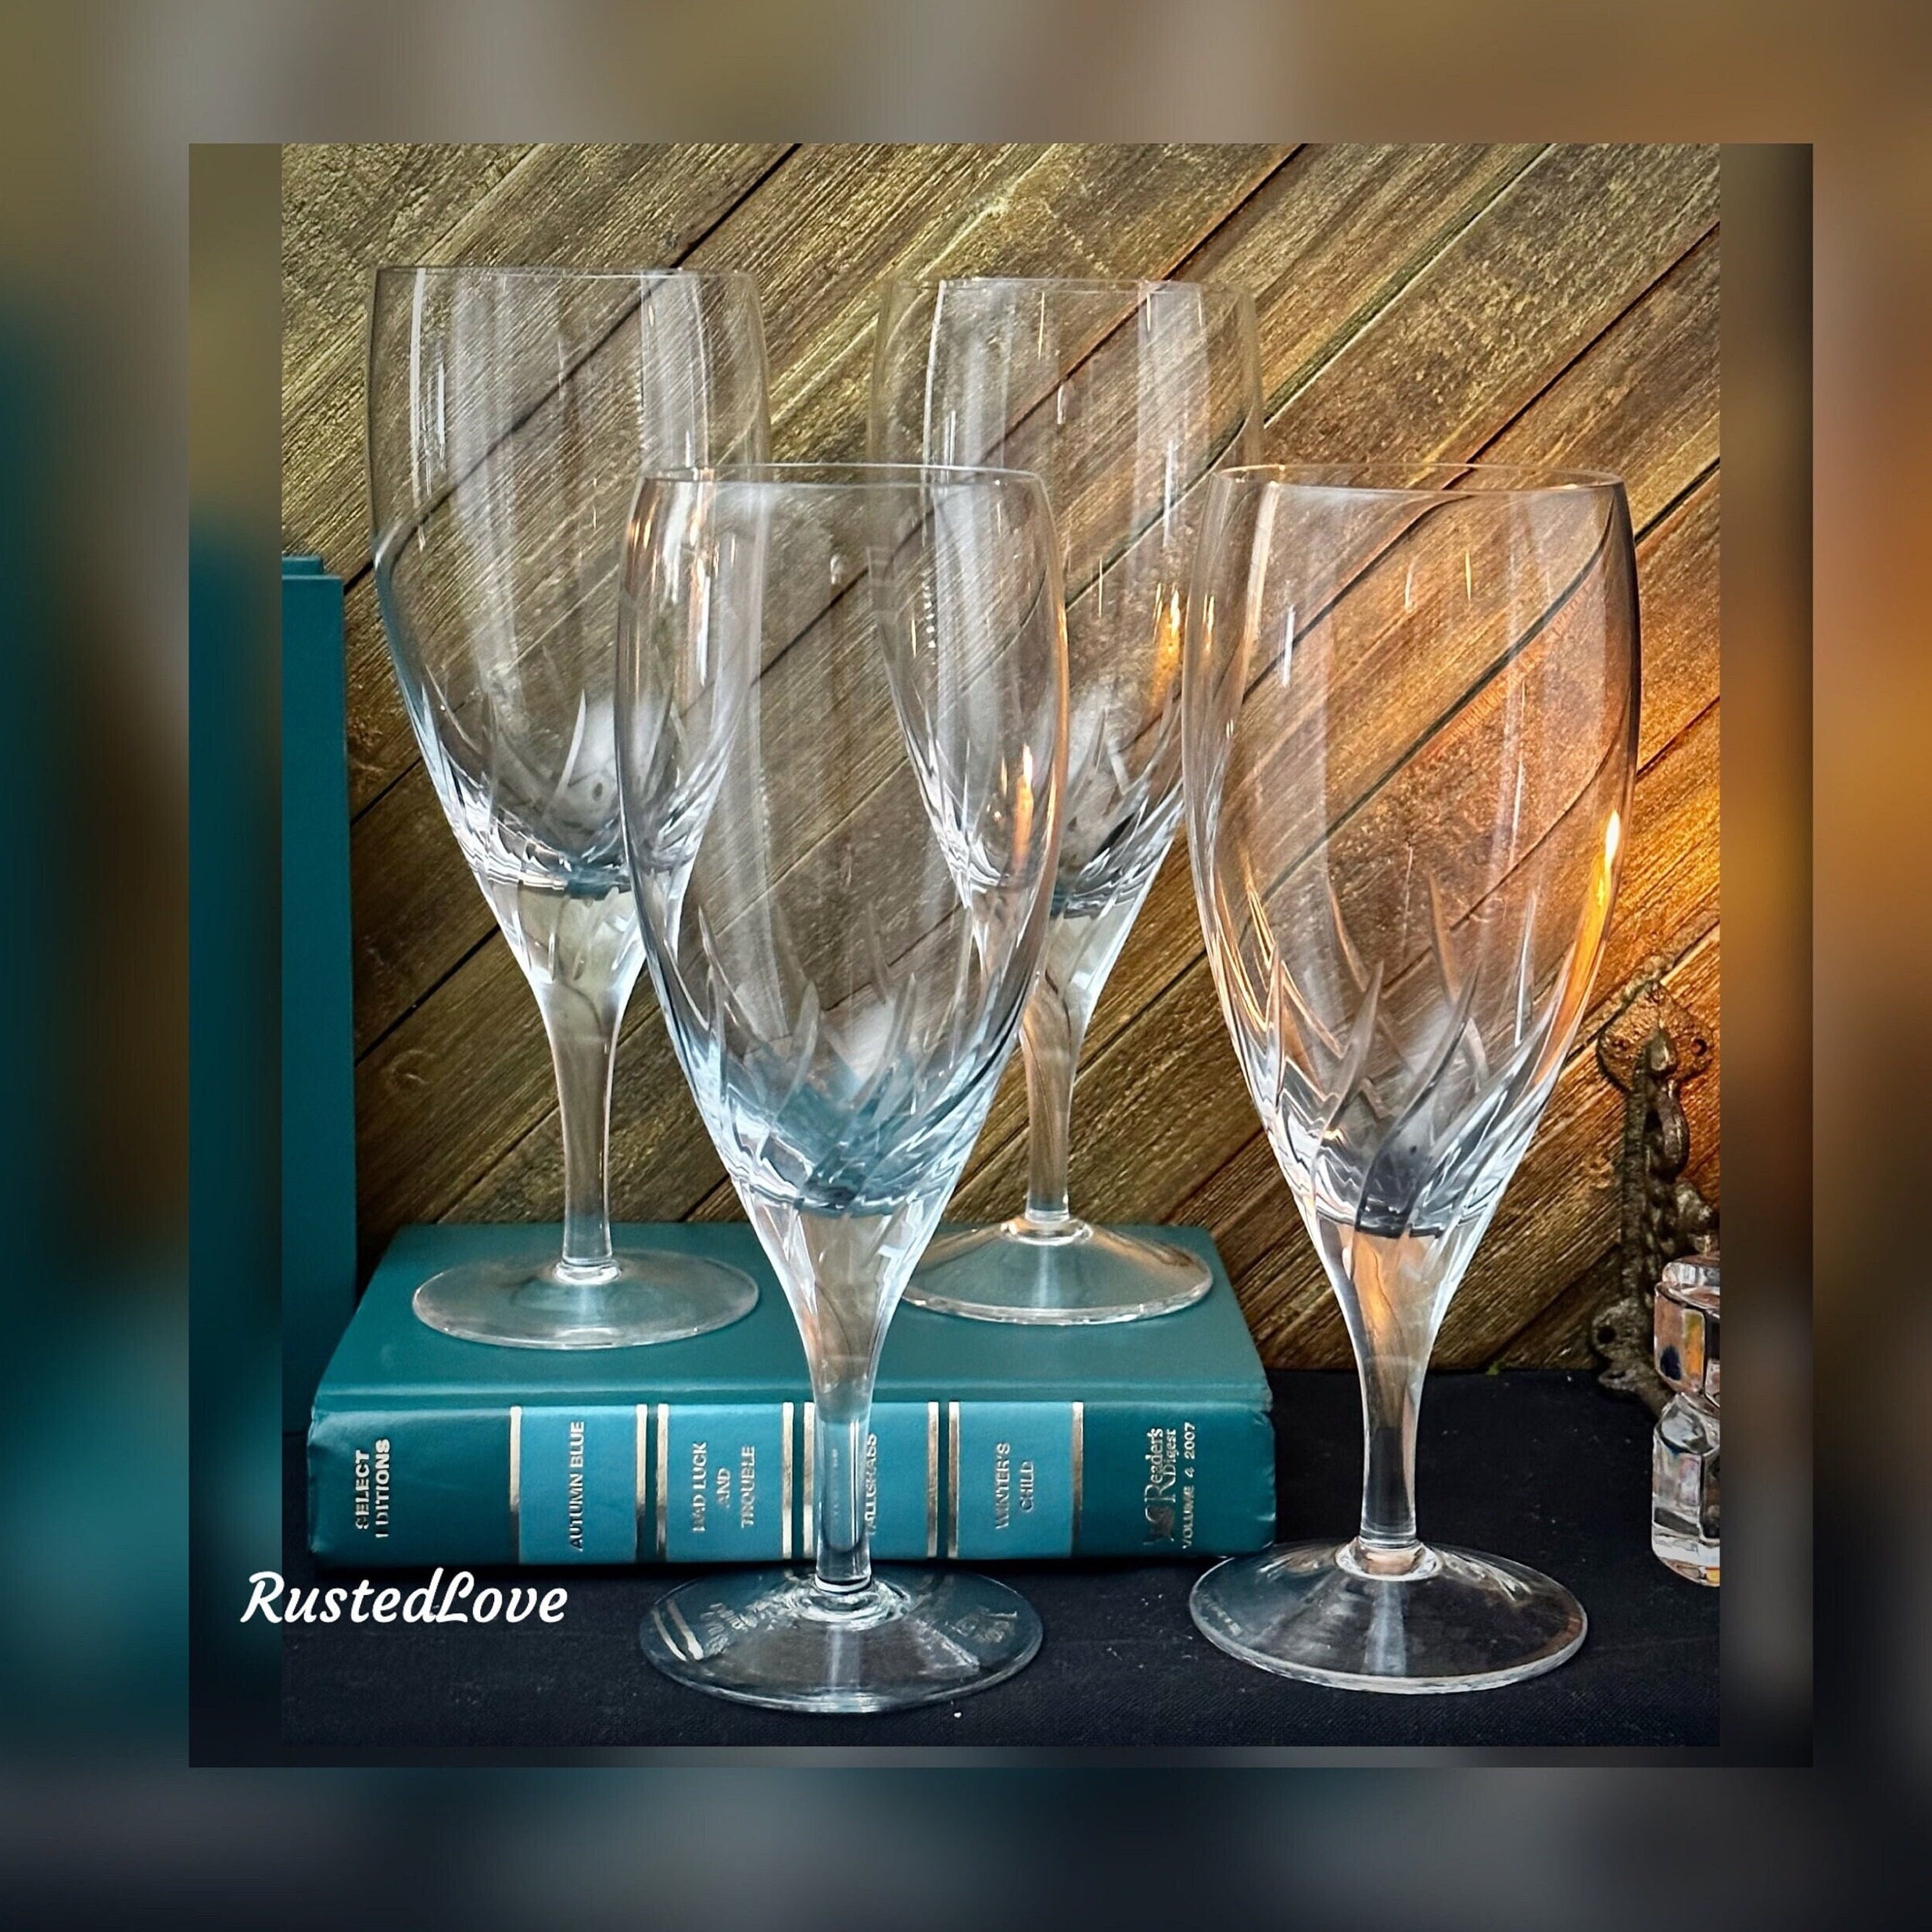 Blue Drinking Glasses Set for Couple, Painted Glass Tumblers, Water Glasses  Gift Set, Iced Tea Glasses 